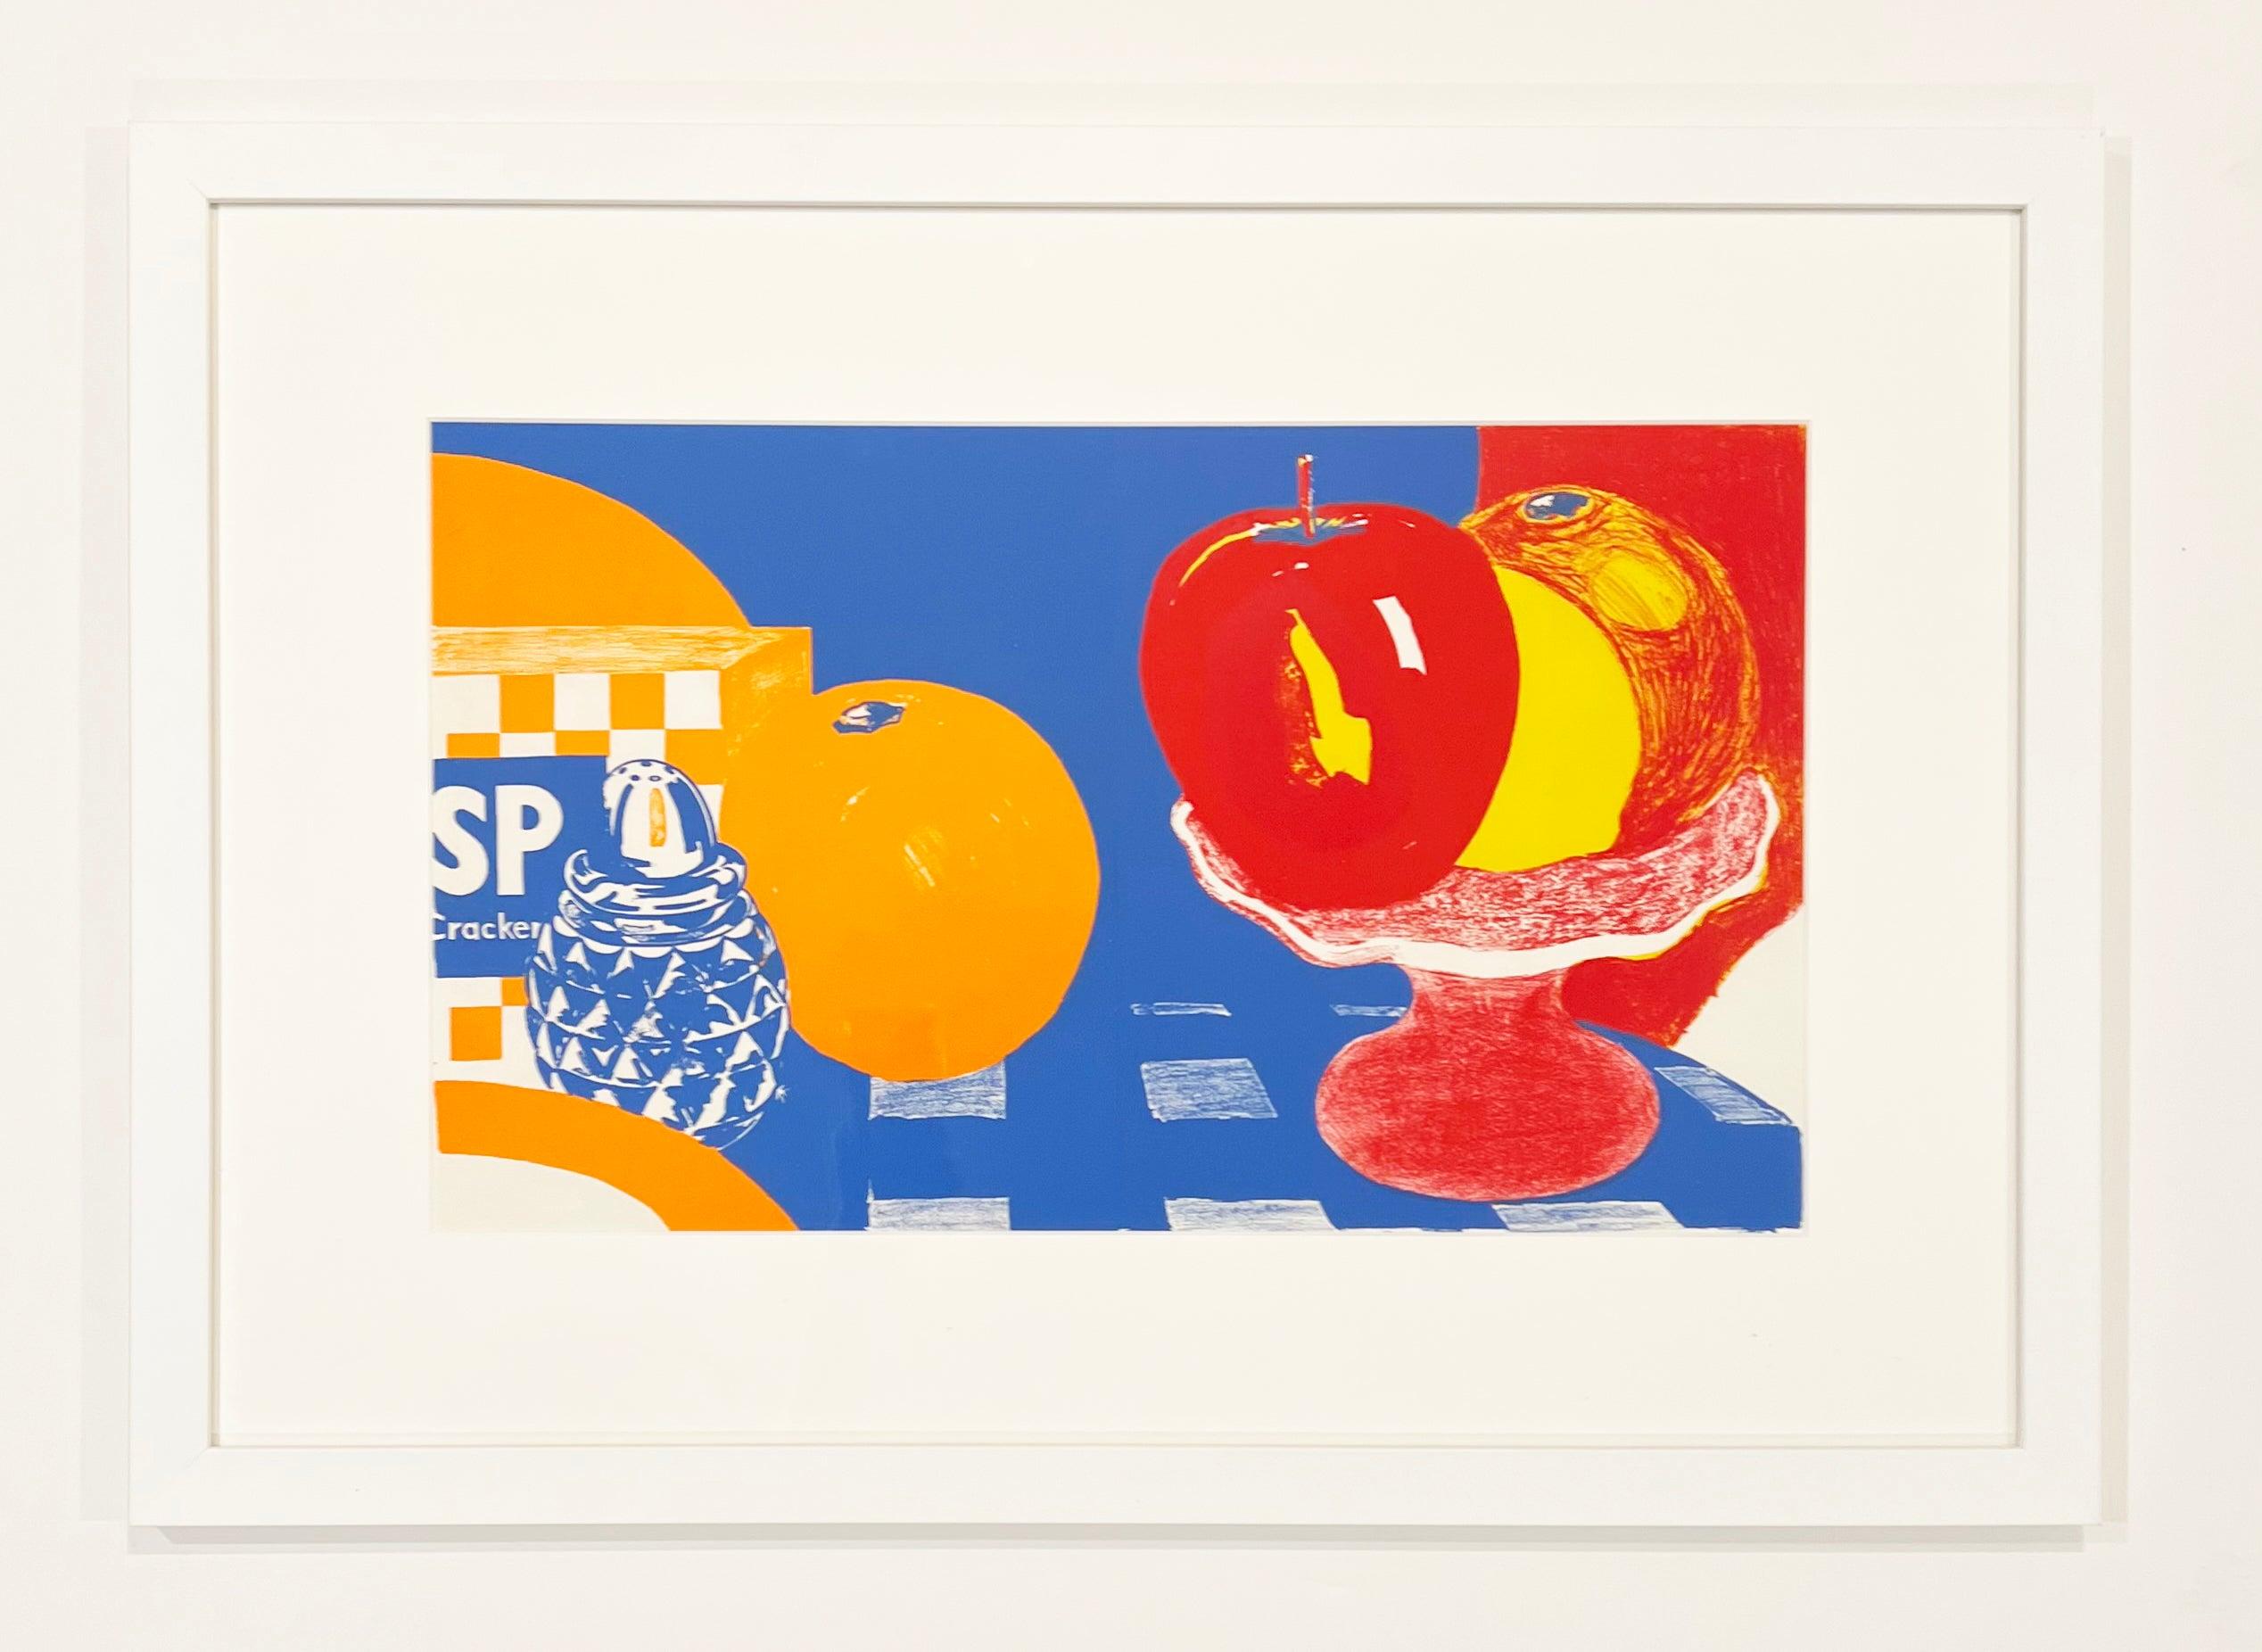 Still Life with Fruit, from 1¢ Life - Print by Tom Wesselmann